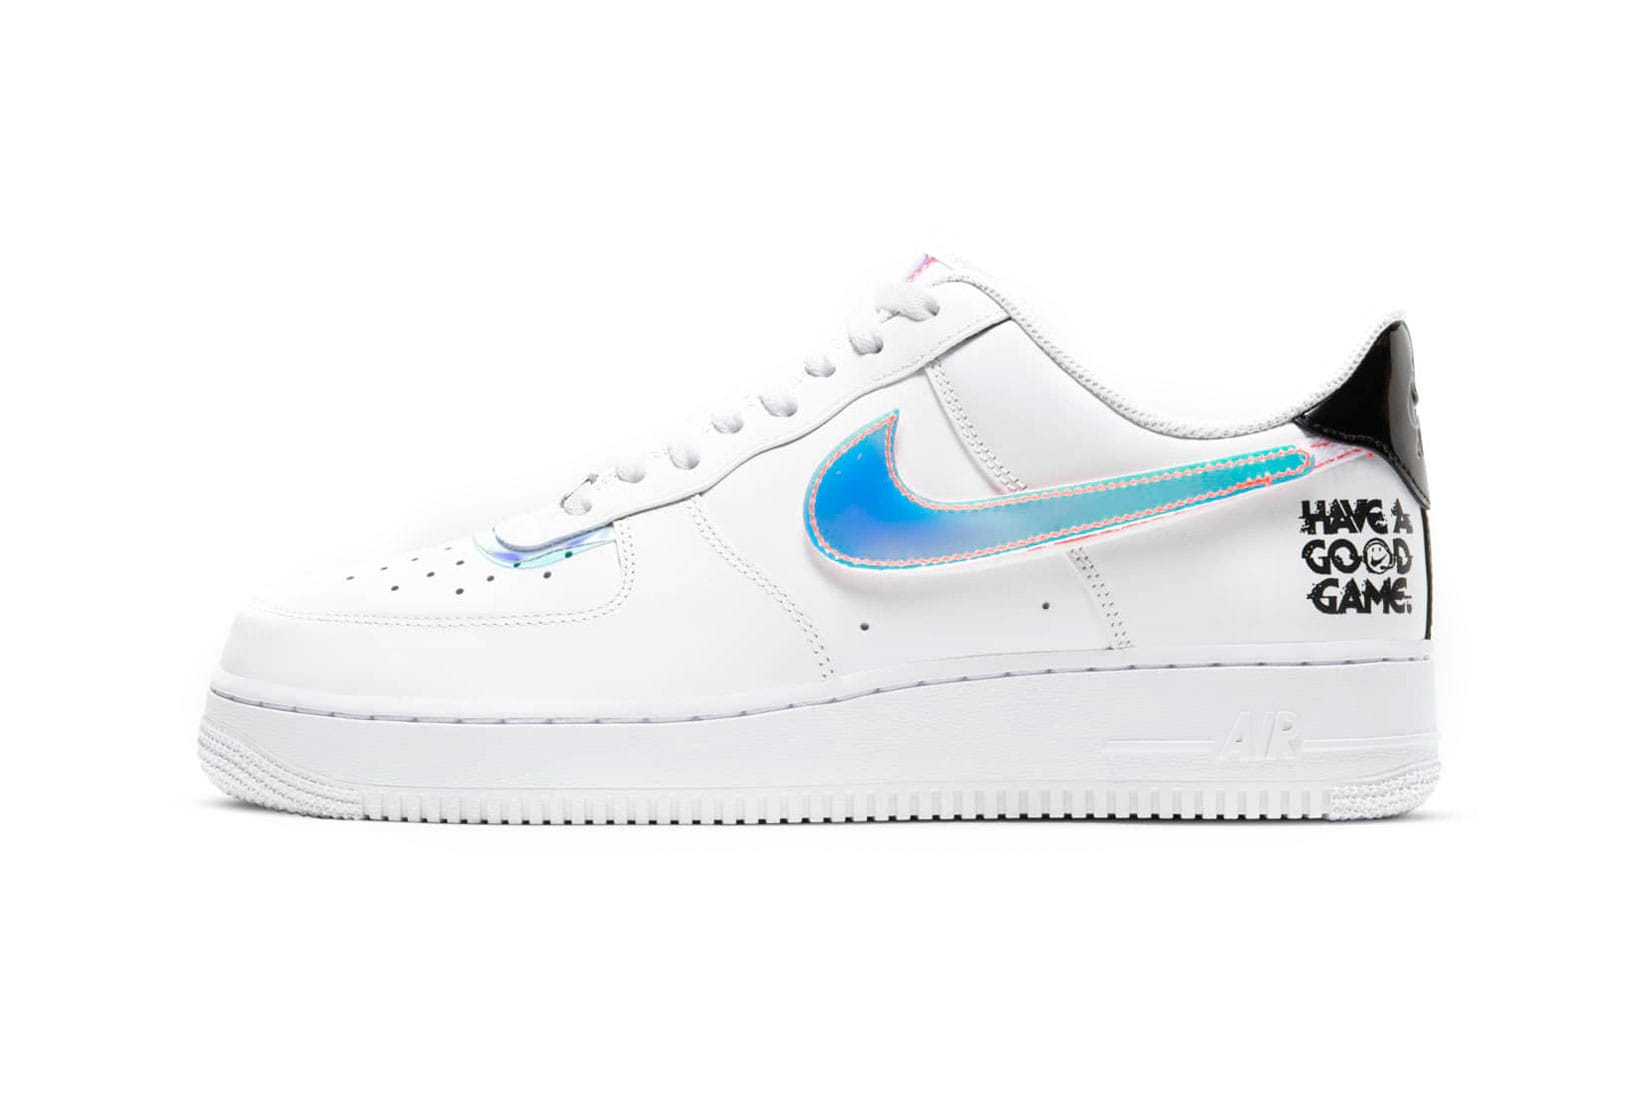 Holographic Air Force 1 Good Game Pack 